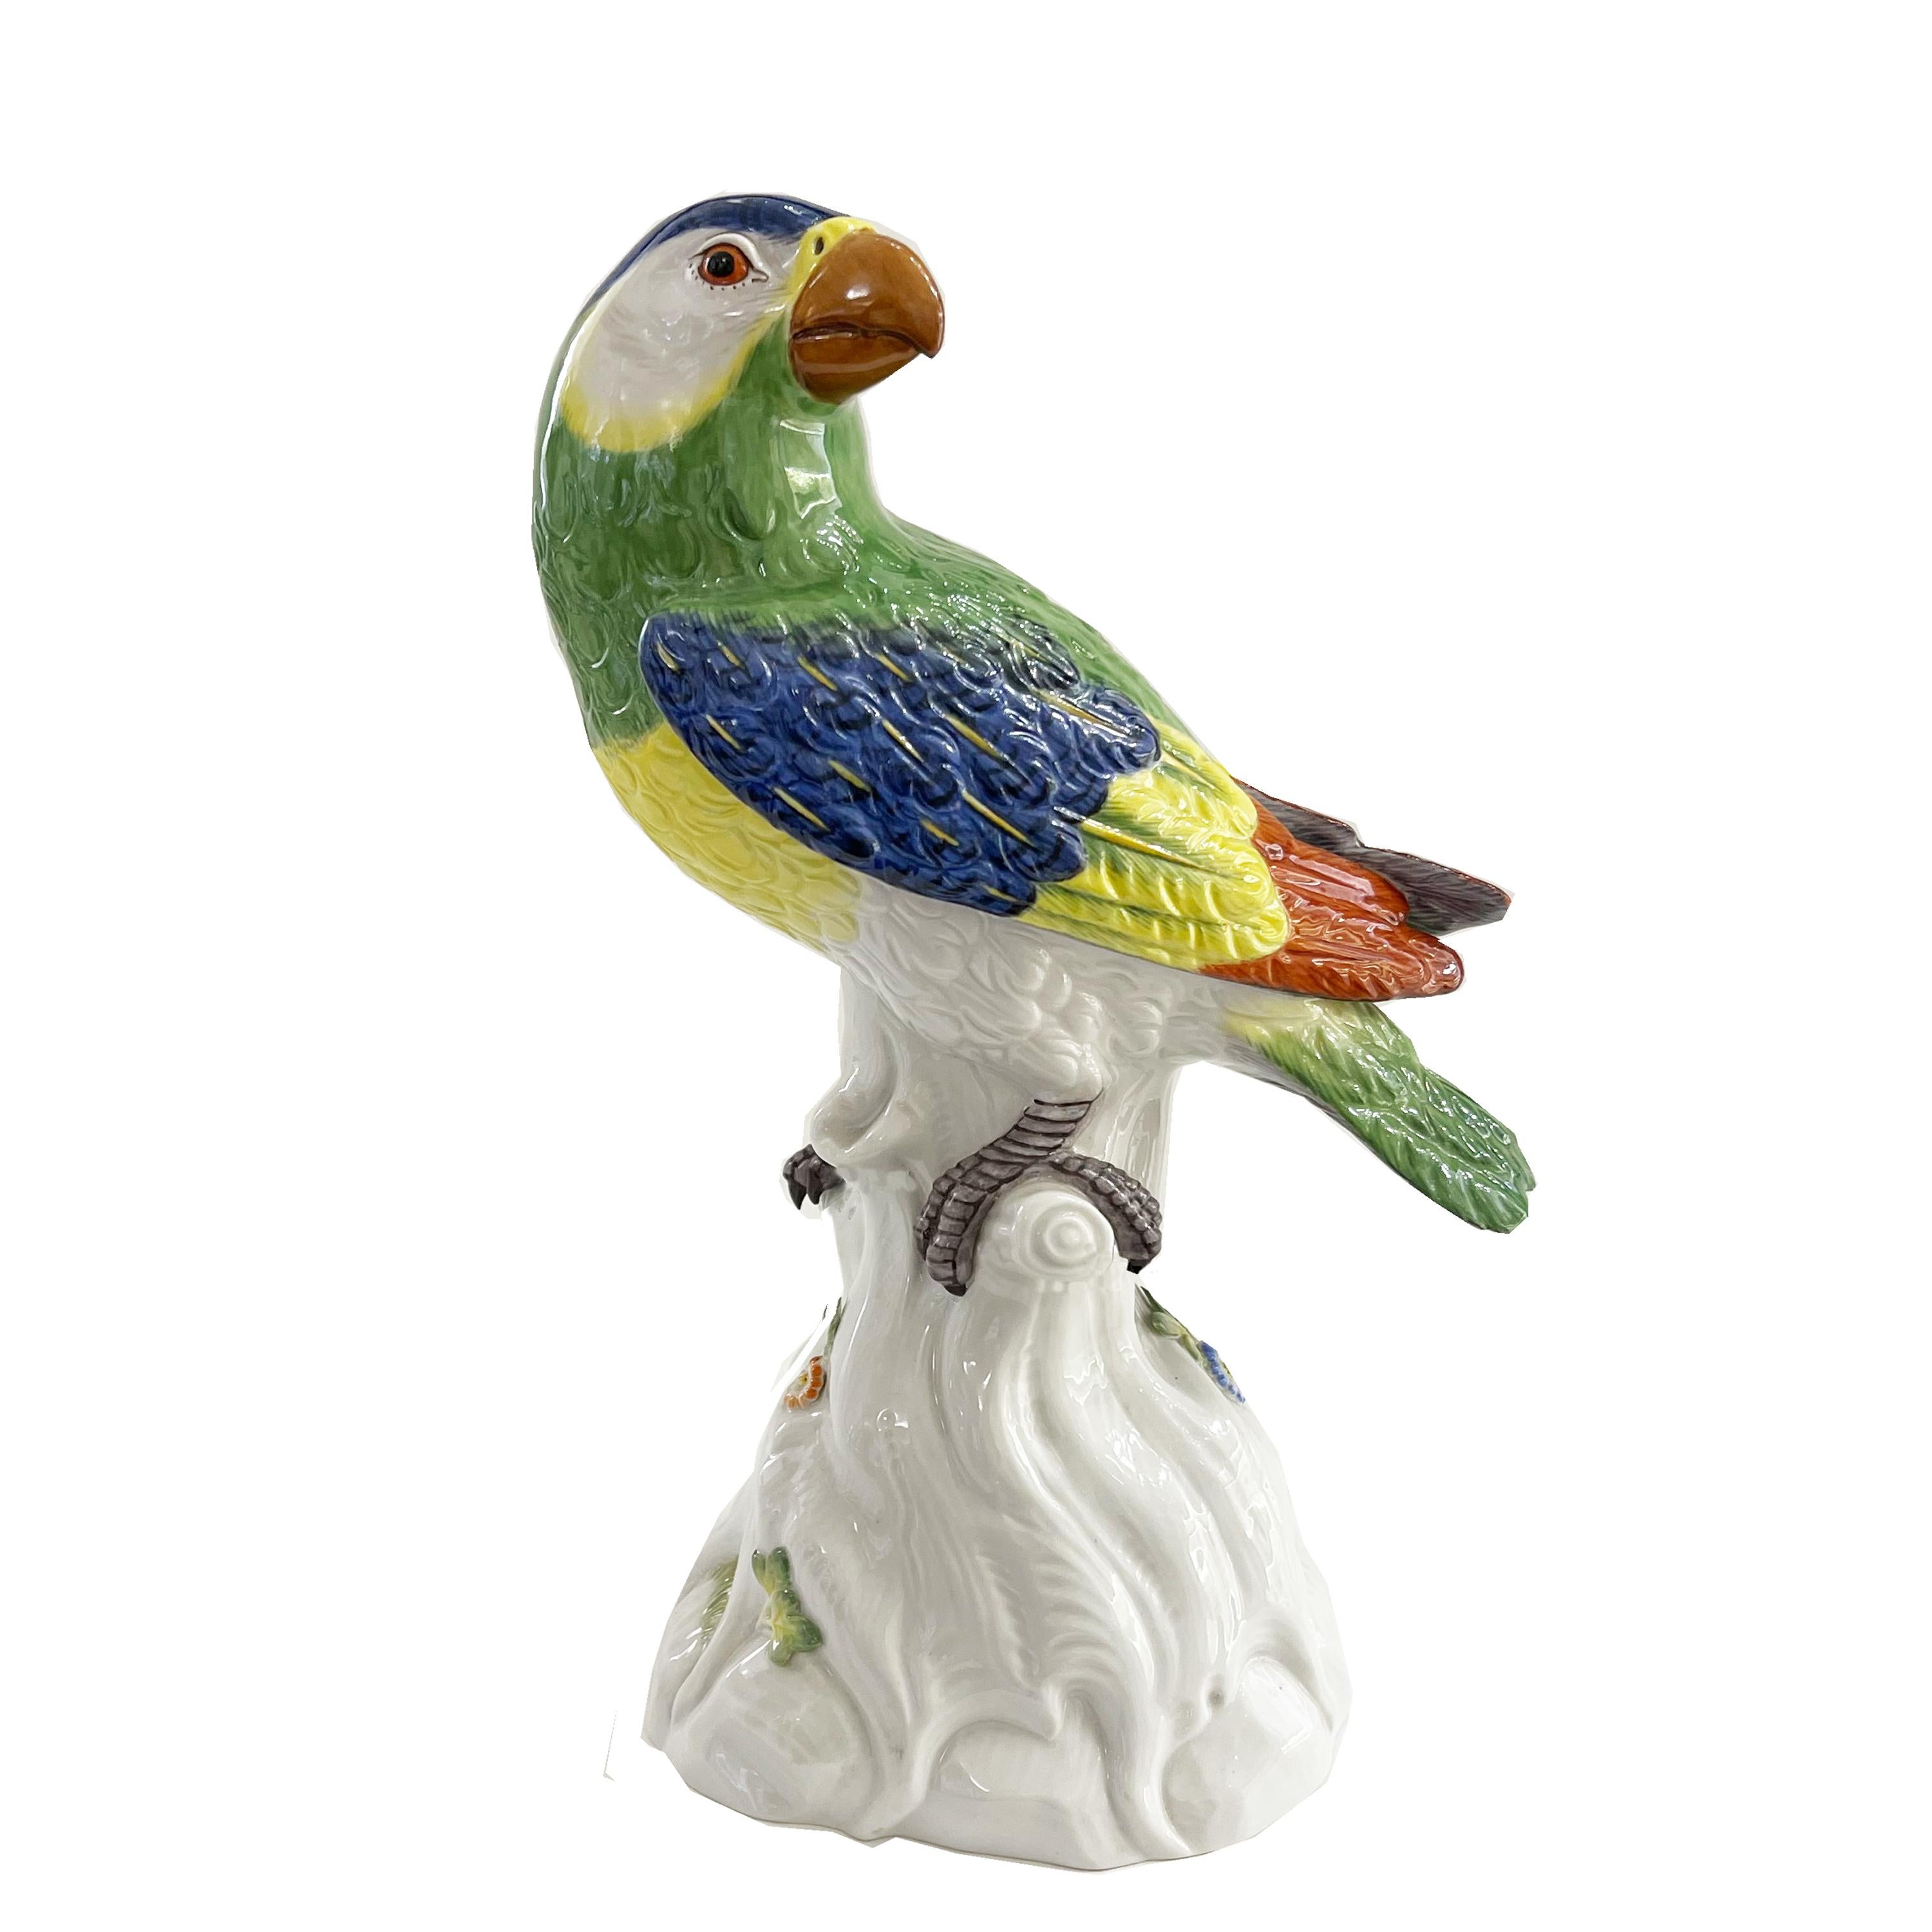 This beautiful parrot was made by the Meissen factory, perhaps the oldest and most prestigious porcelain factory in Europe, using the model created by Kandler in the 1700s.
In 1731 the Meissen  manufactory began a new genre in European porcelain,